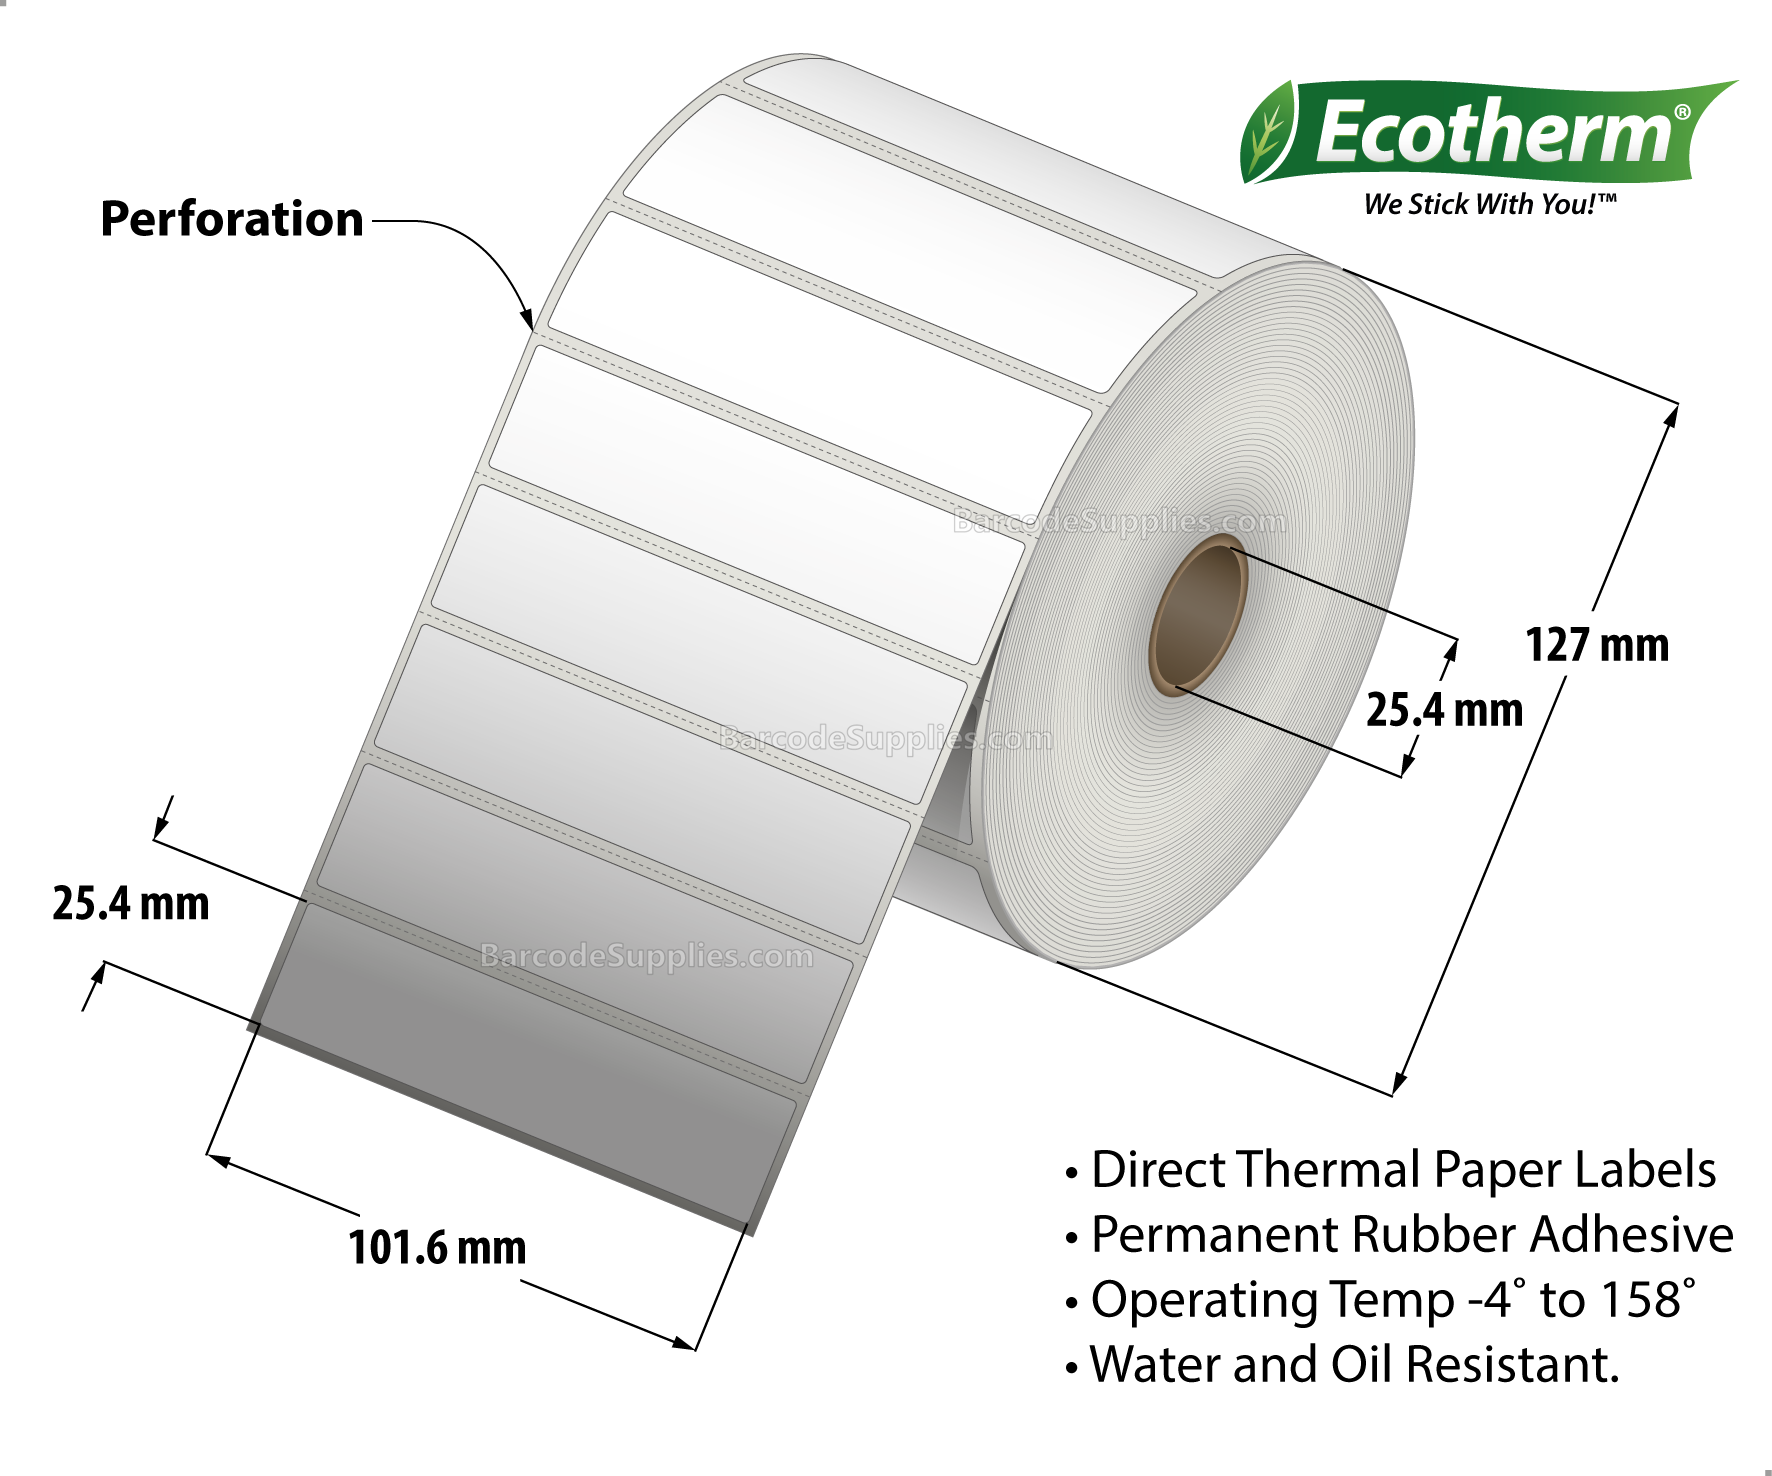 4 x 1 Direct Thermal White Labels With Rubber Adhesive - Perforated - 2500 Labels Per Roll - Carton Of 6 Rolls - 15000 Labels Total - MPN: ECOTHERM15146-6